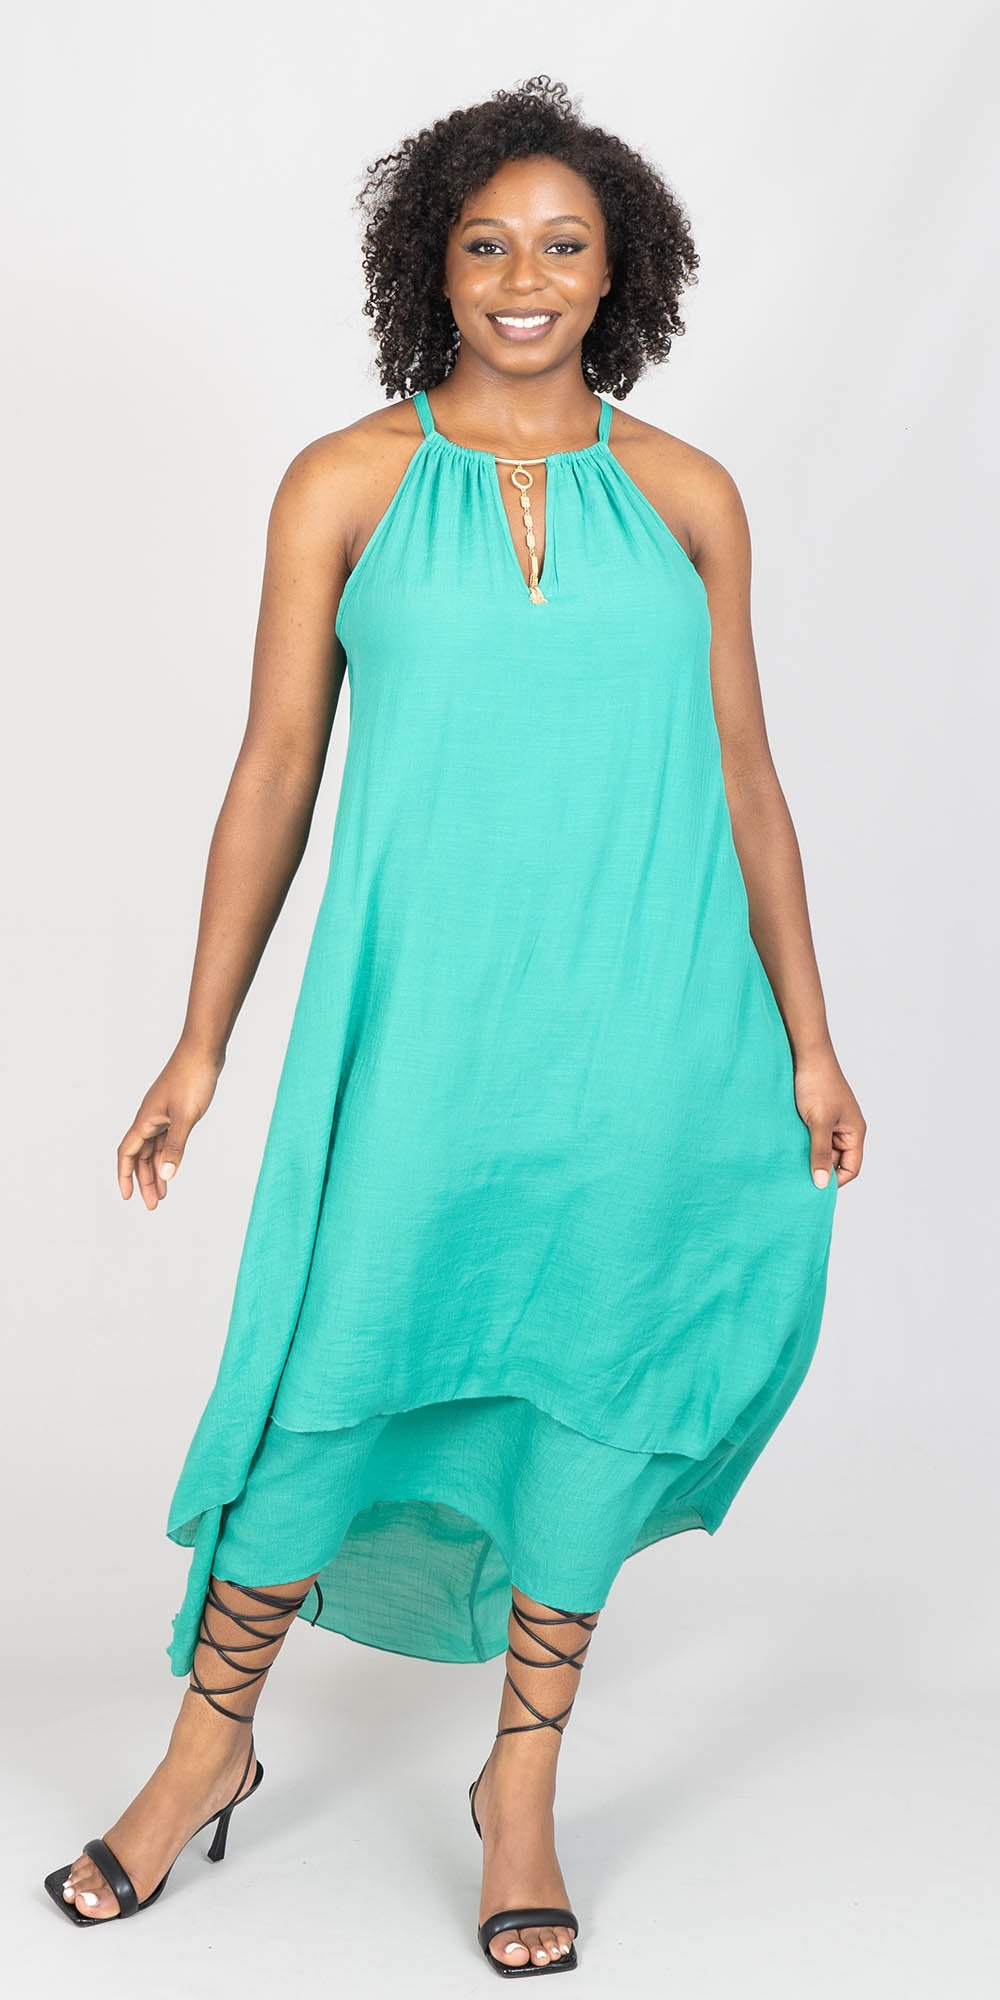 Mlle Gabrielle - 84024A1 - Green - High-low Maxi Dress with Jewelry